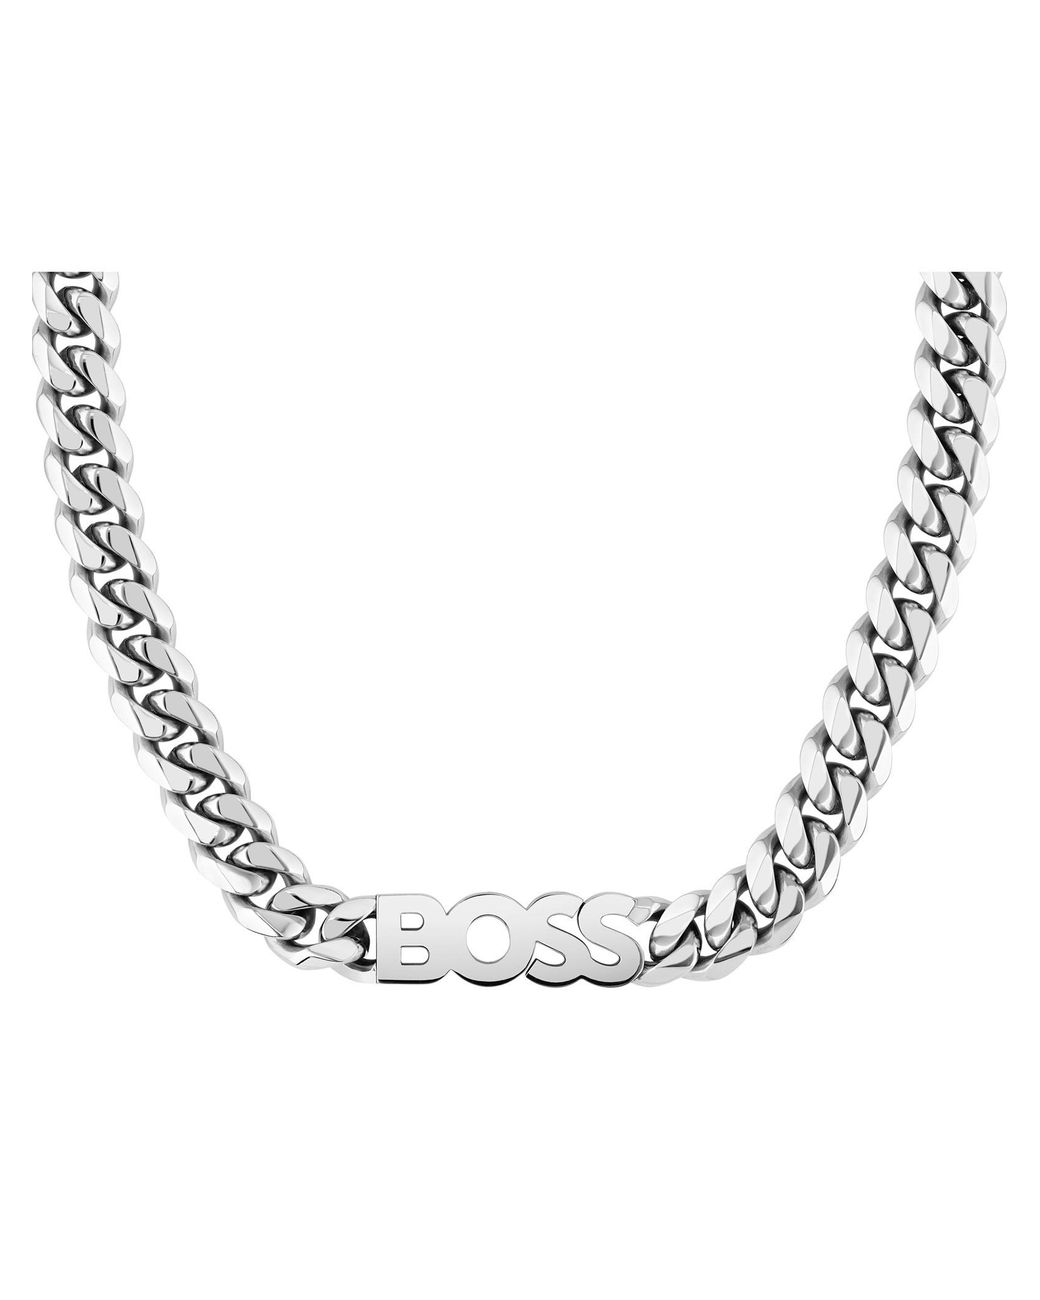 Shop Hugo Boss Street Style Chain Logo Necklaces & Chokers by Brown‐Fluffy  | BUYMA